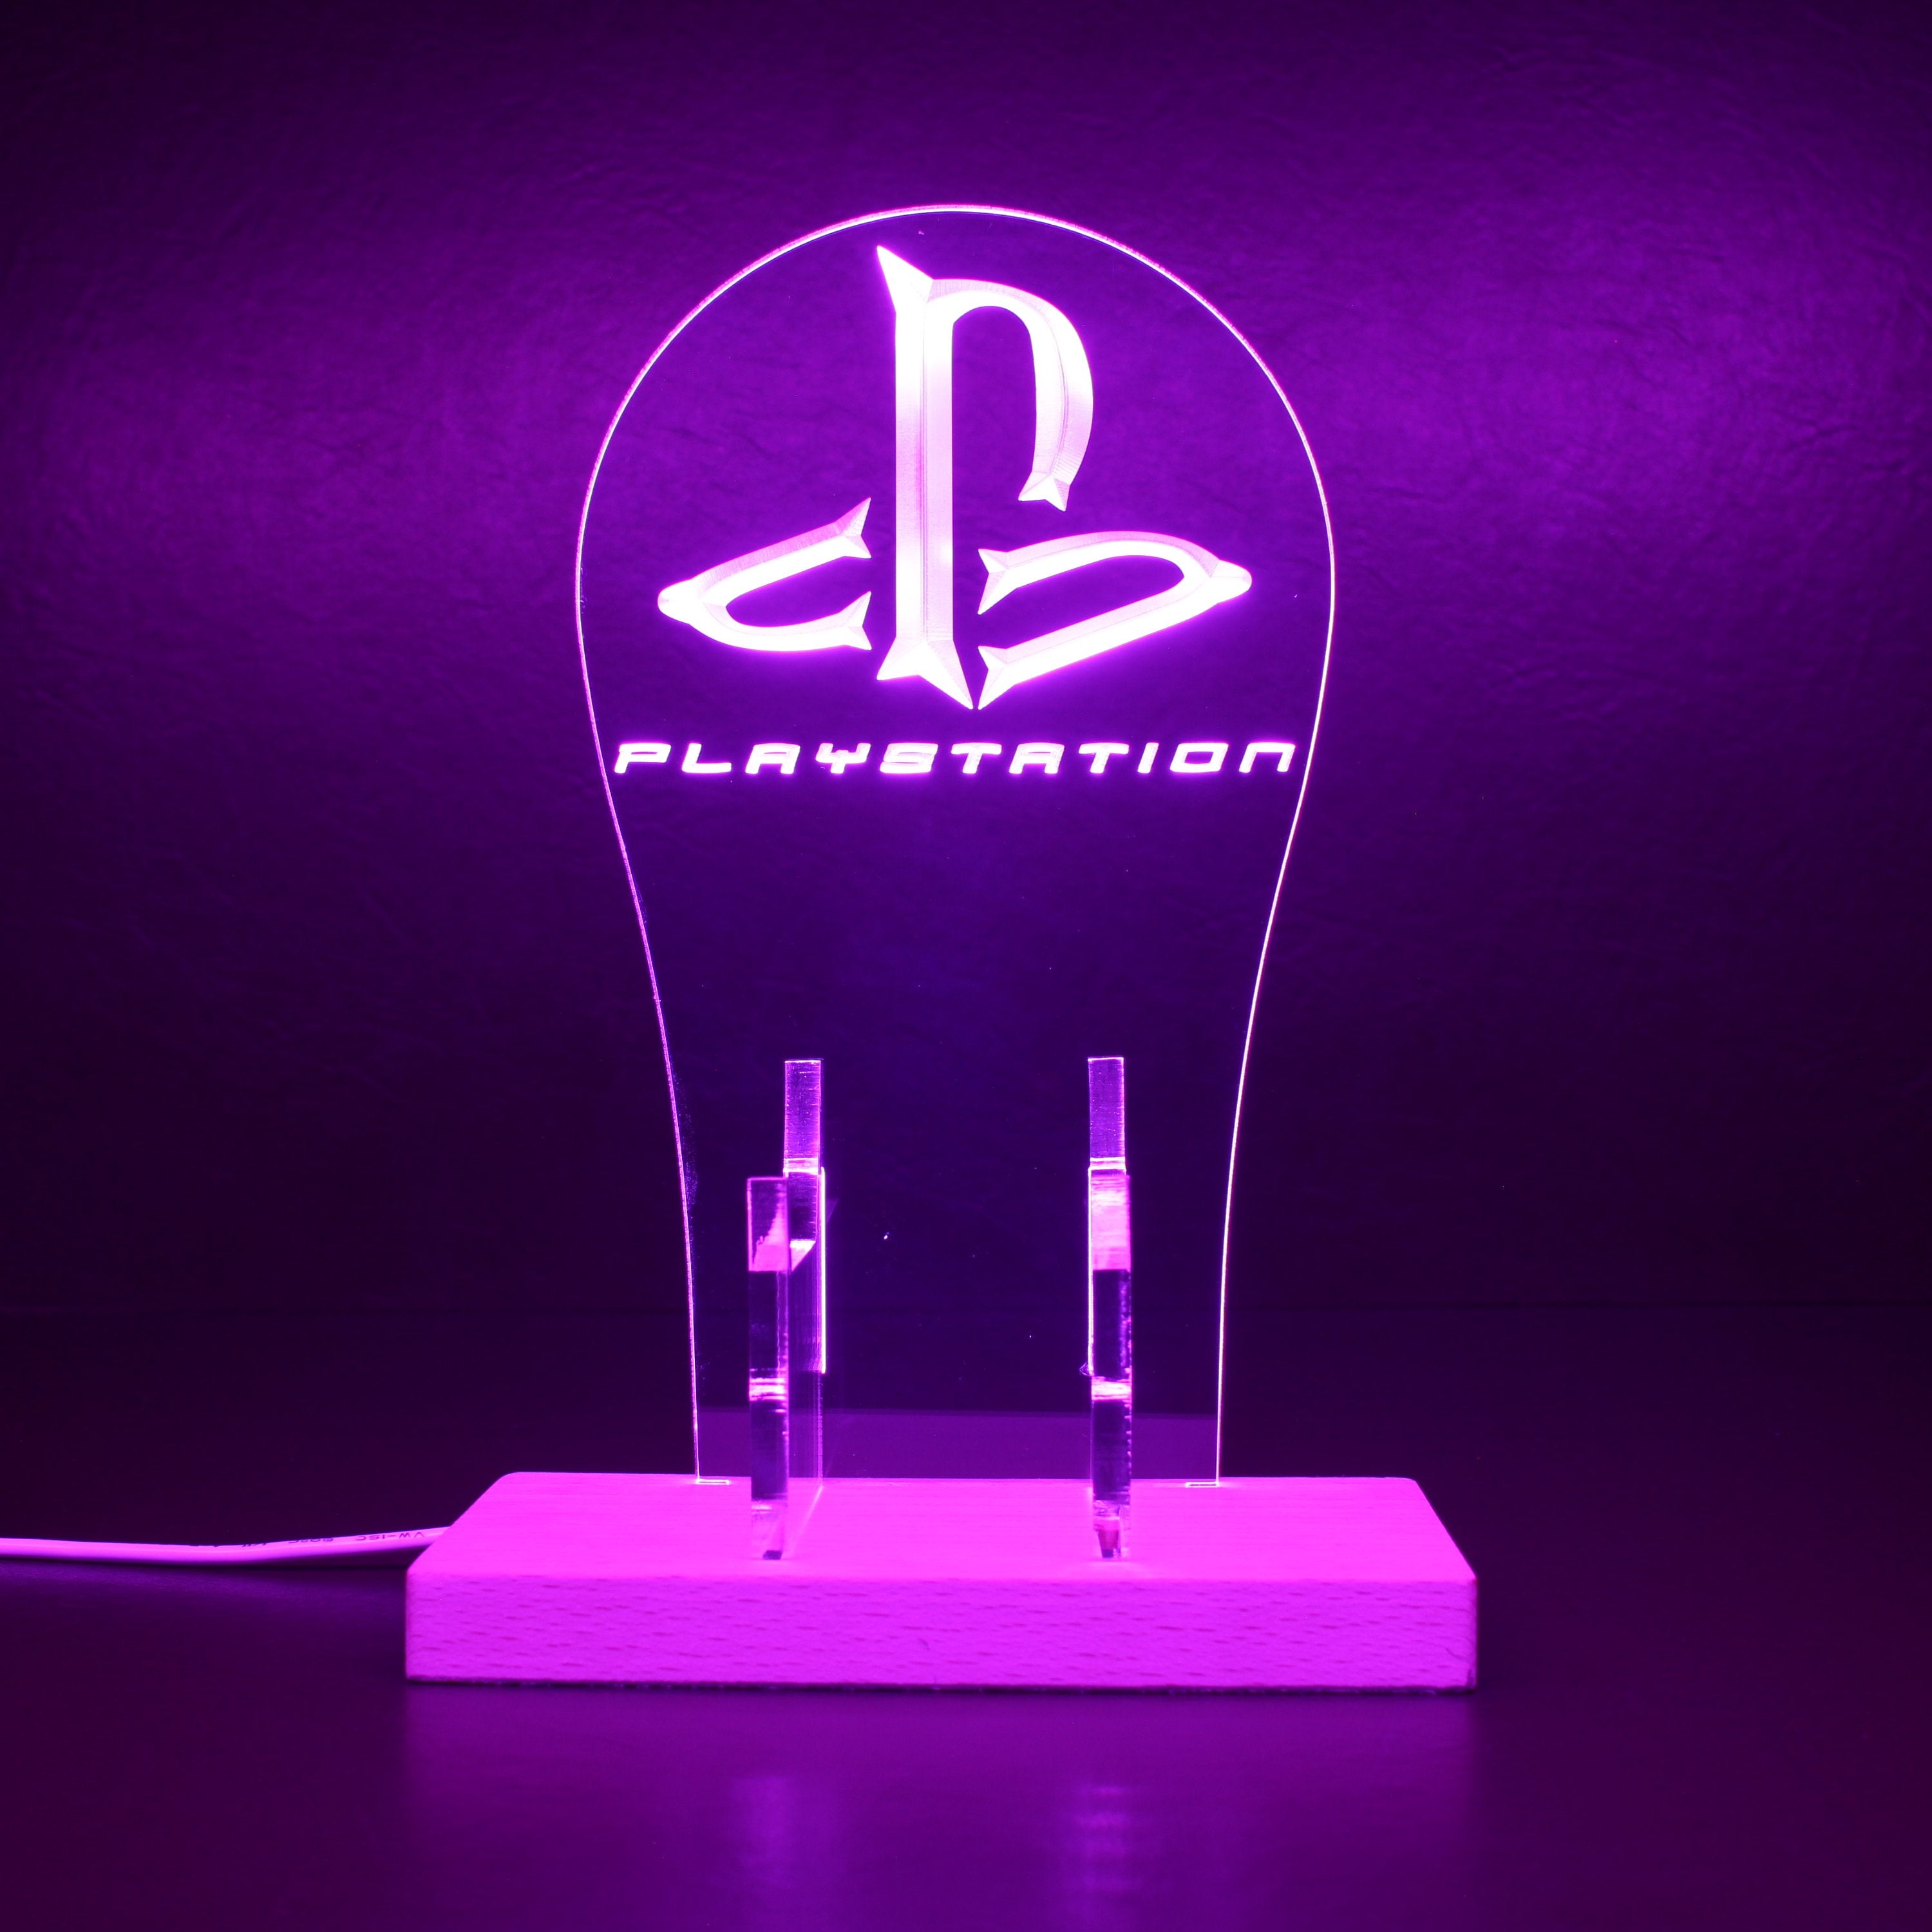 Playstation RGB LED Gaming Headset Controller Stand